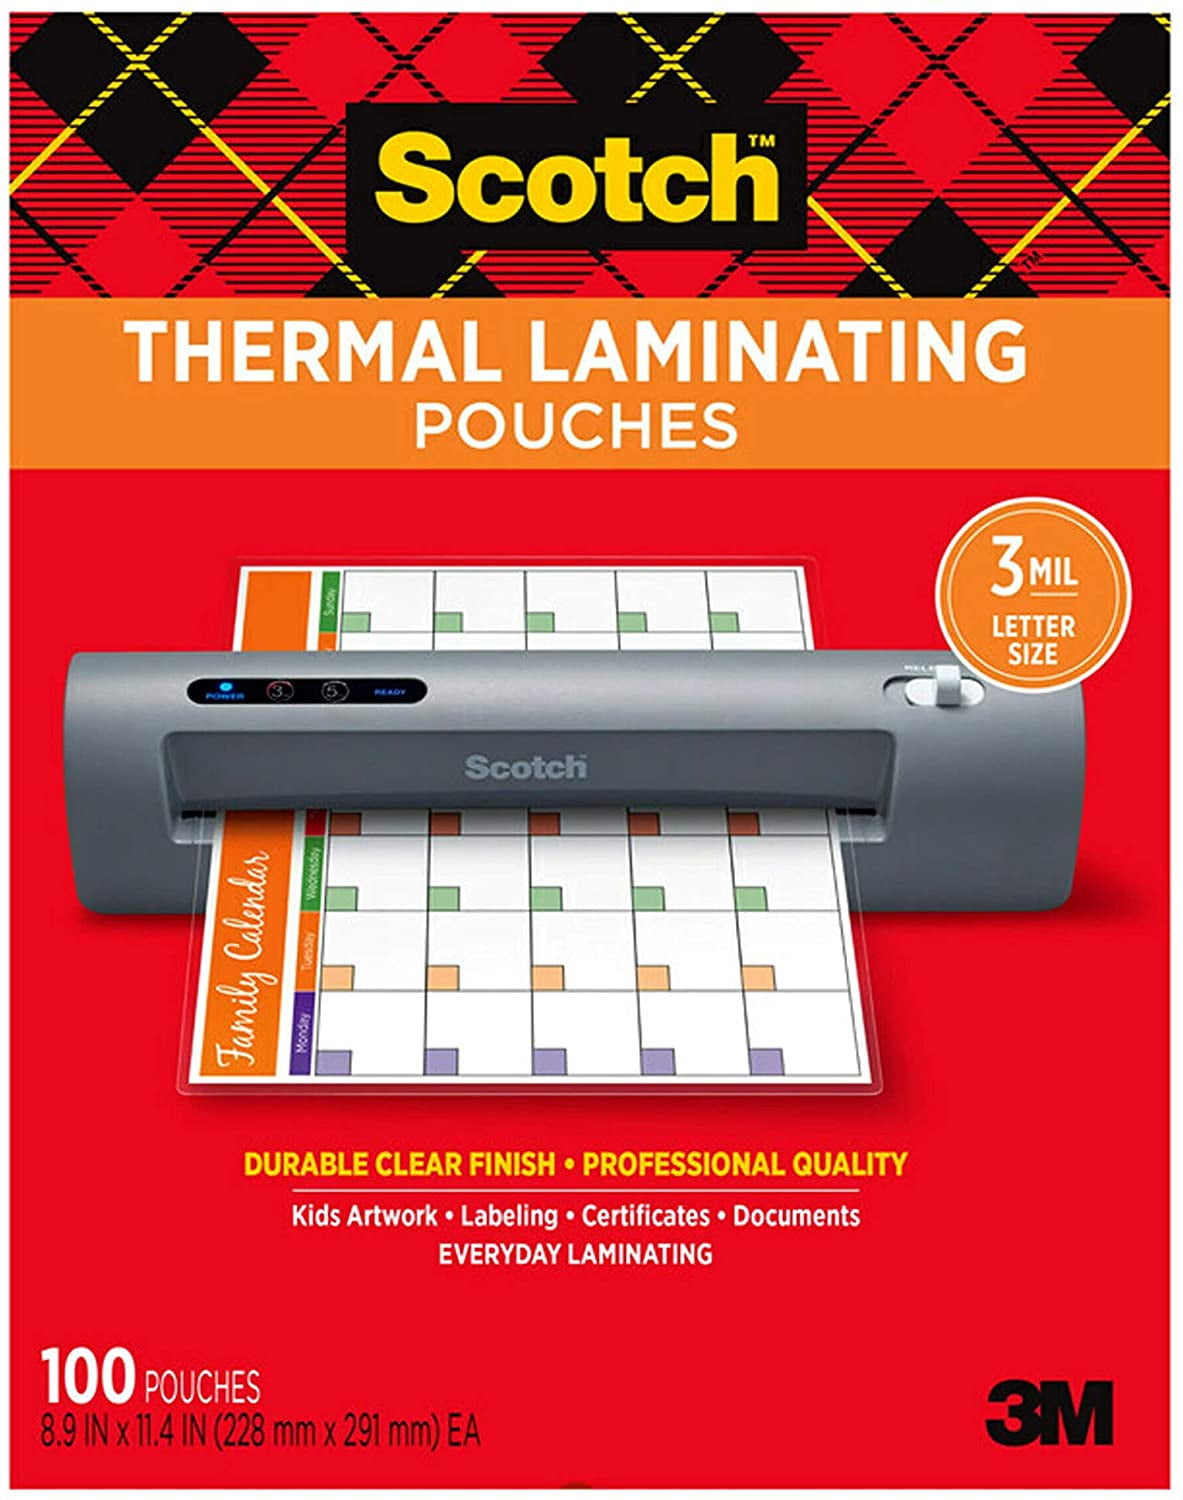 Scotch Thermal Laminating Pouches 100 Pack 8.9 X 11.4" Letter Size Sheets TP3854 